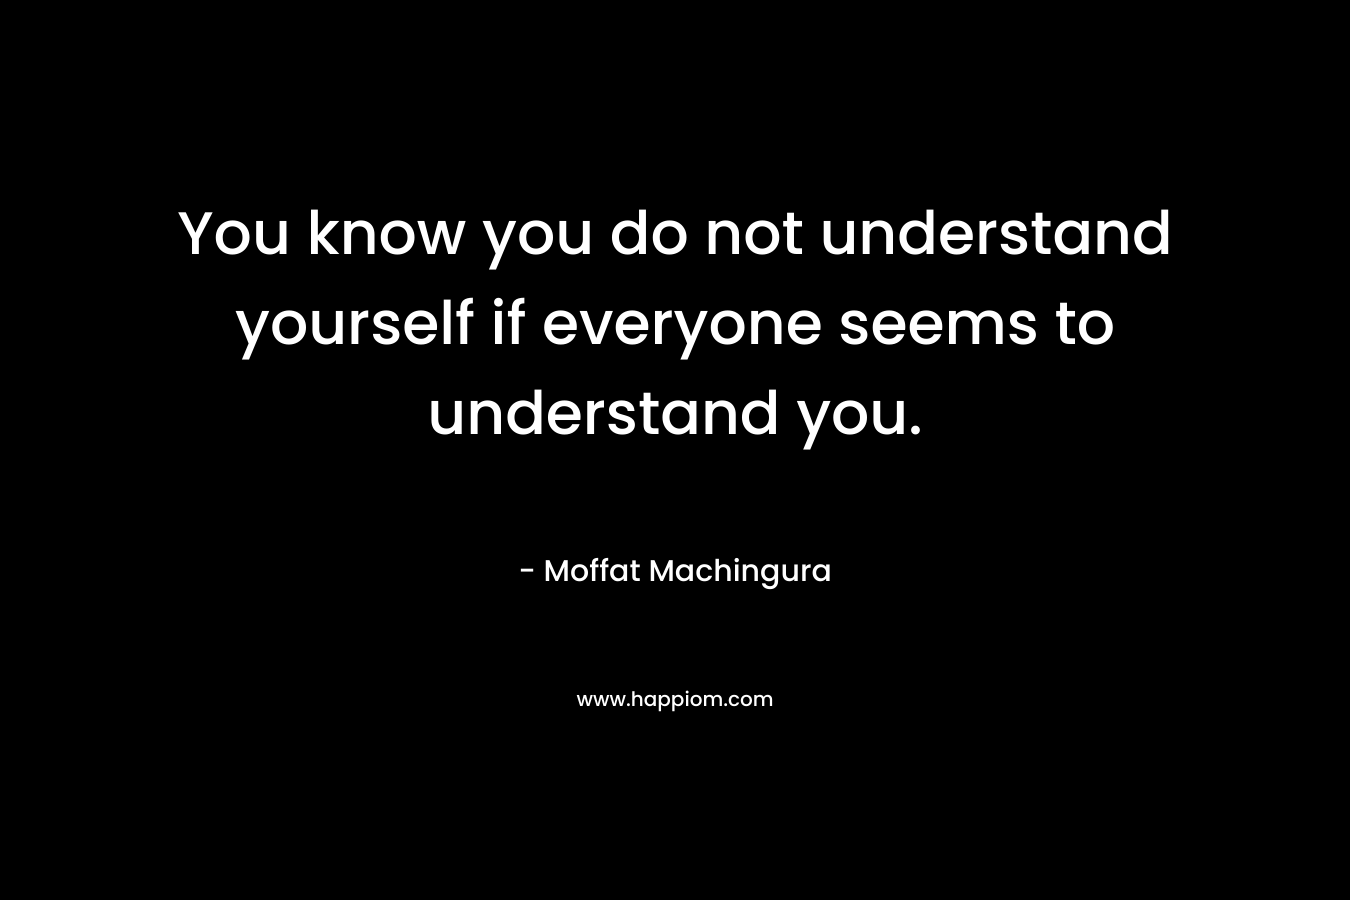 You know you do not understand yourself if everyone seems to understand you.